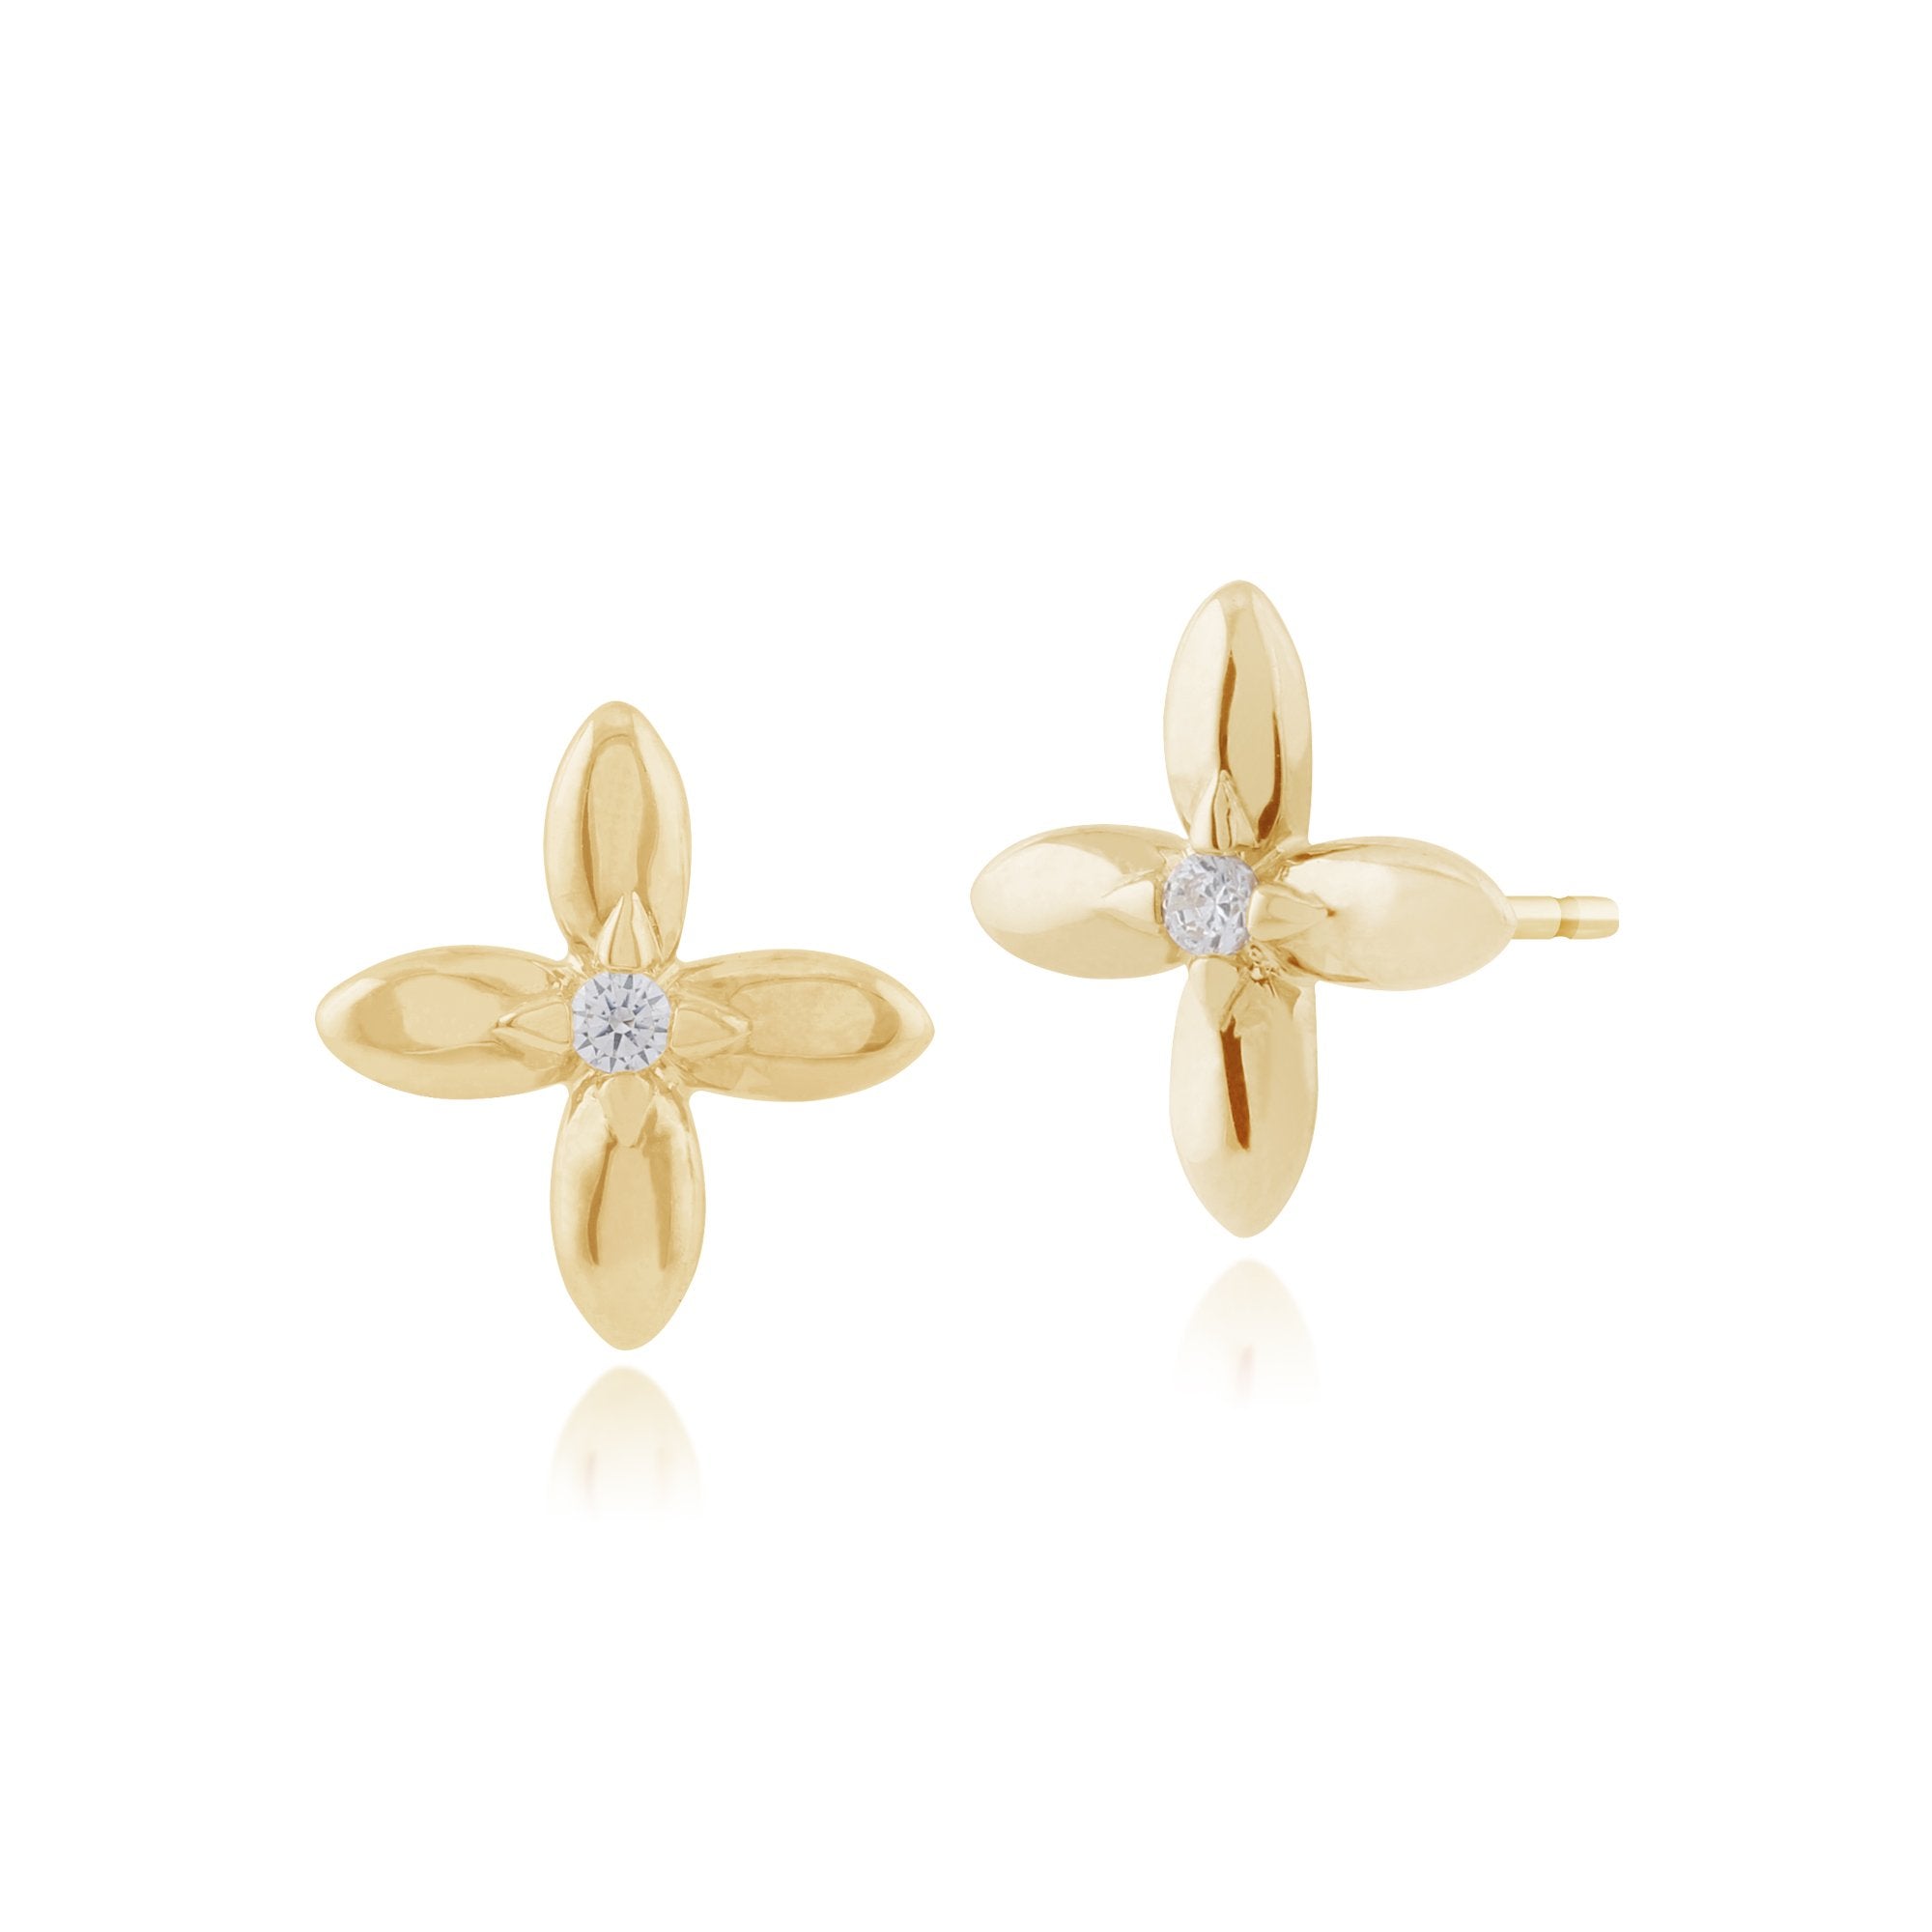 Floral Round Diamond Golden Flower Stud Earrings in 9ct Yellow Gold